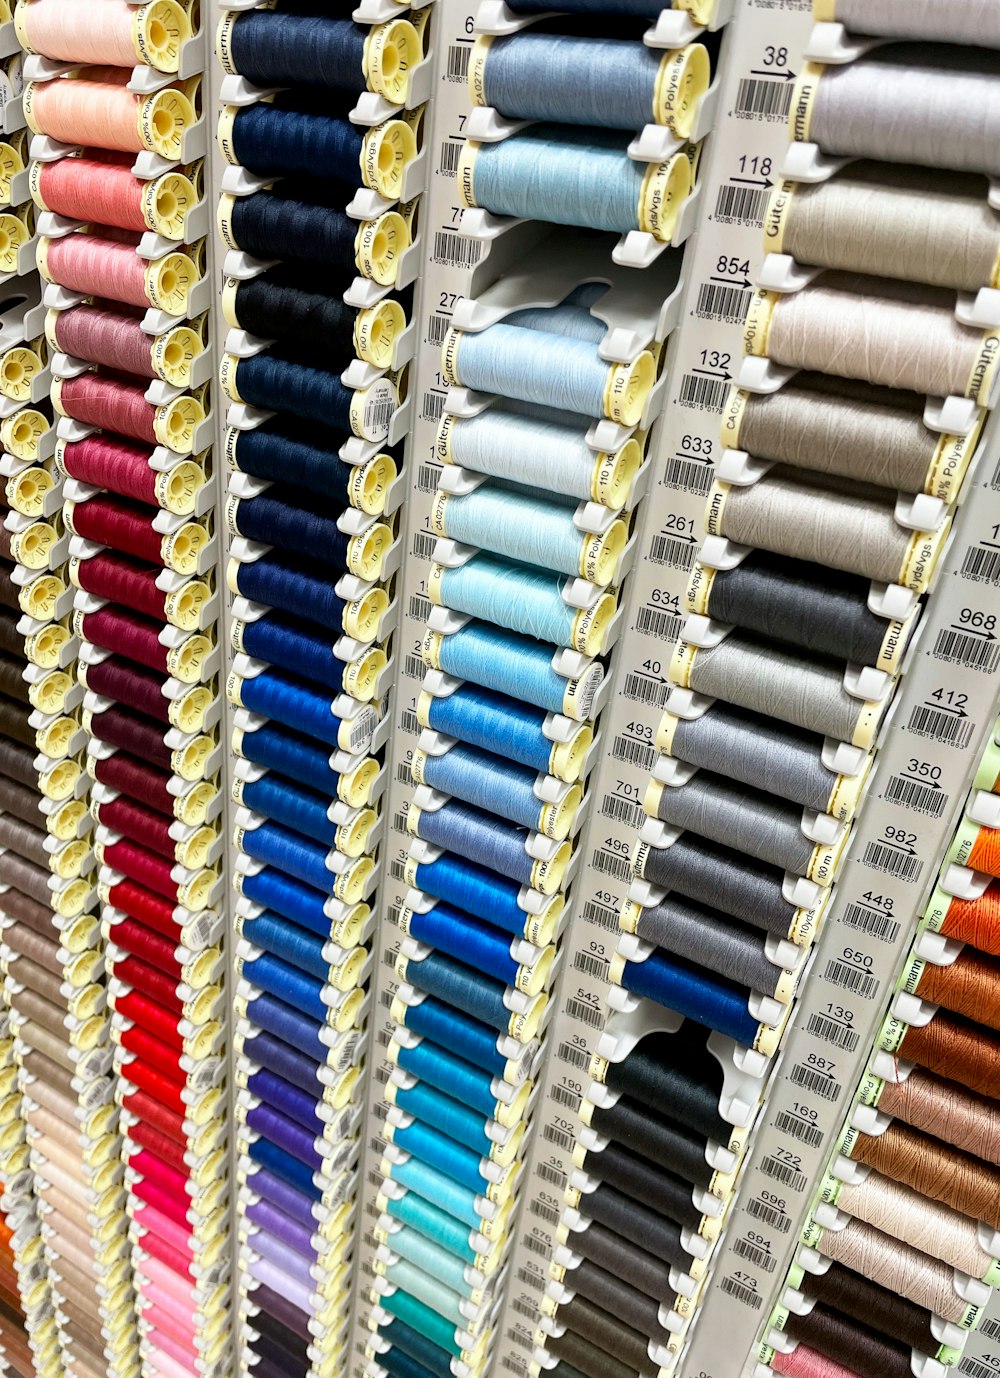 rows of spools of thread on display in a store